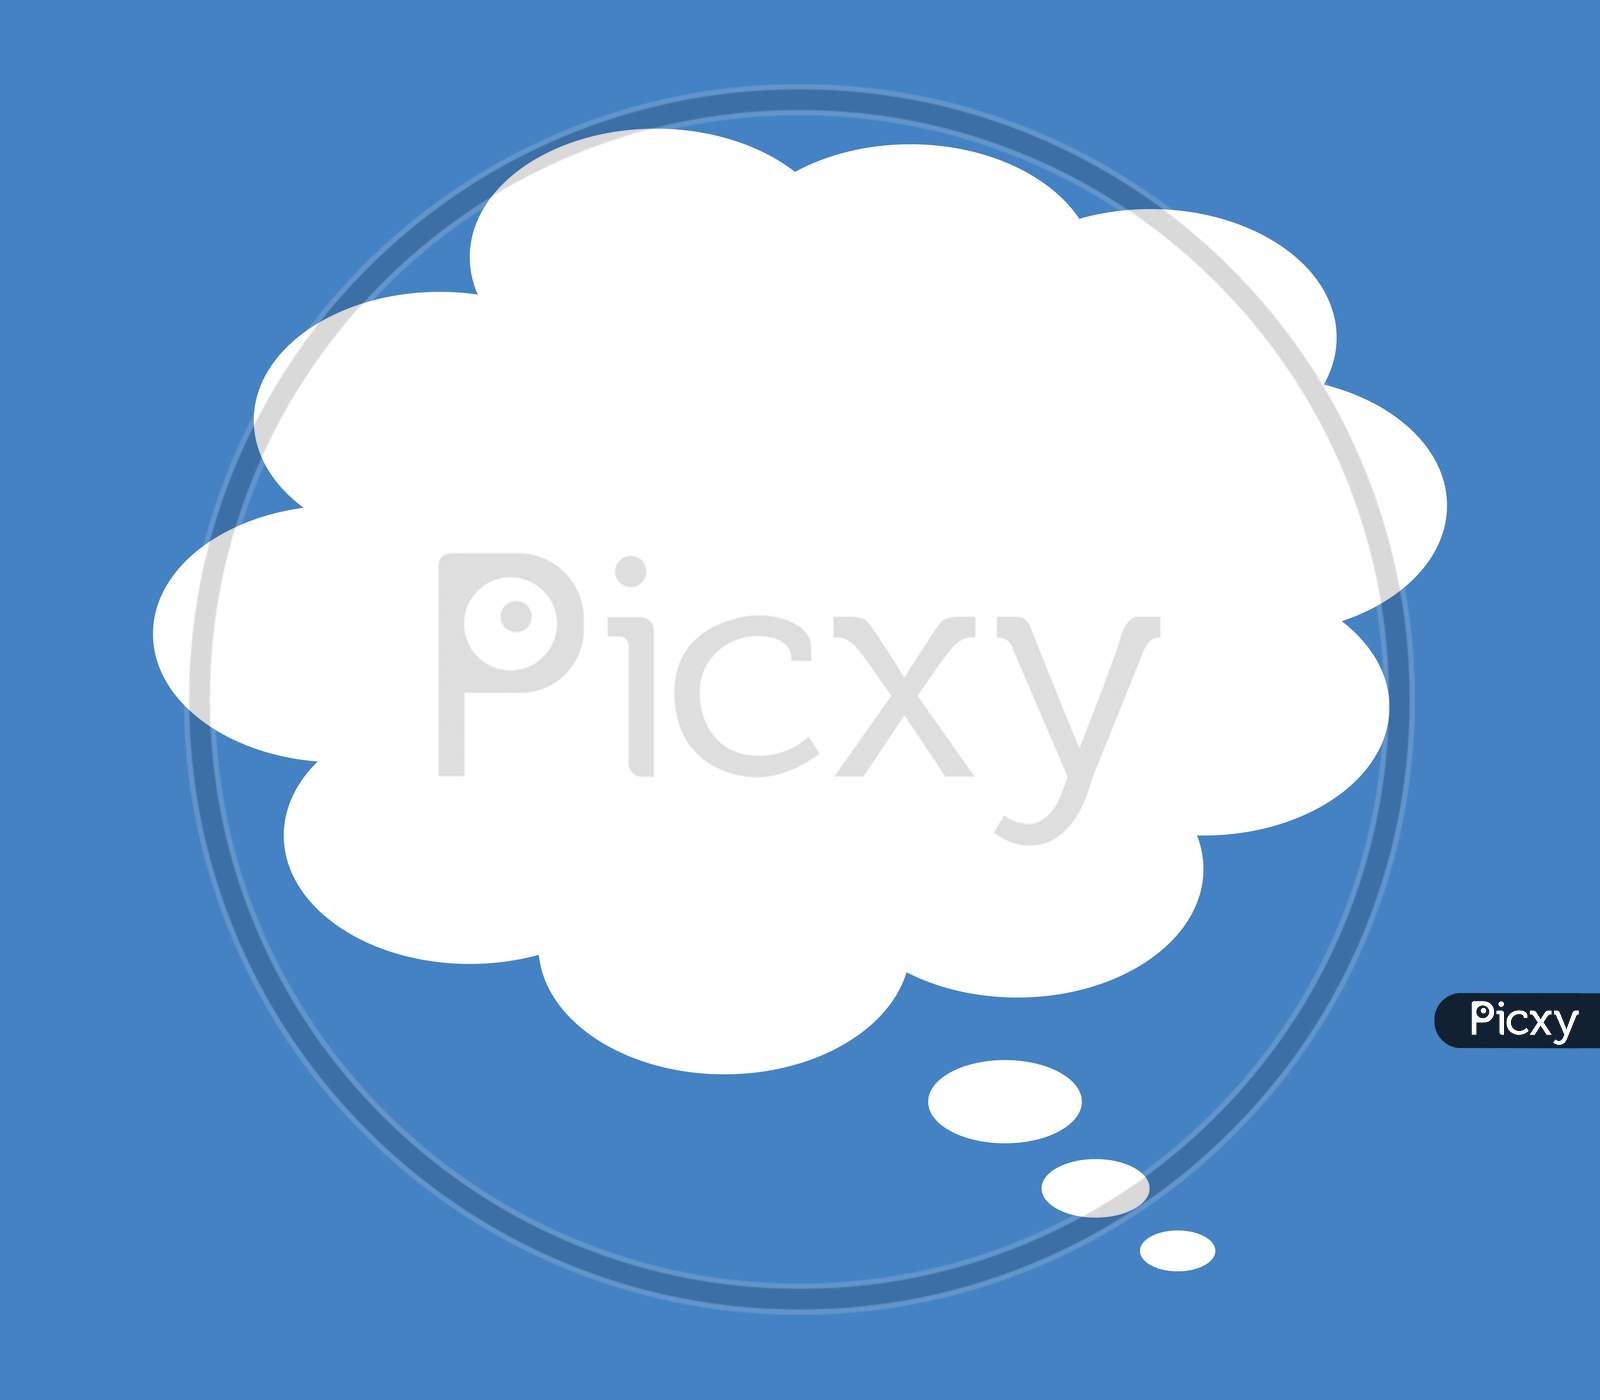 Image Of Think Cloud Icon Illustrated In Vector On White Background Qp Picxy